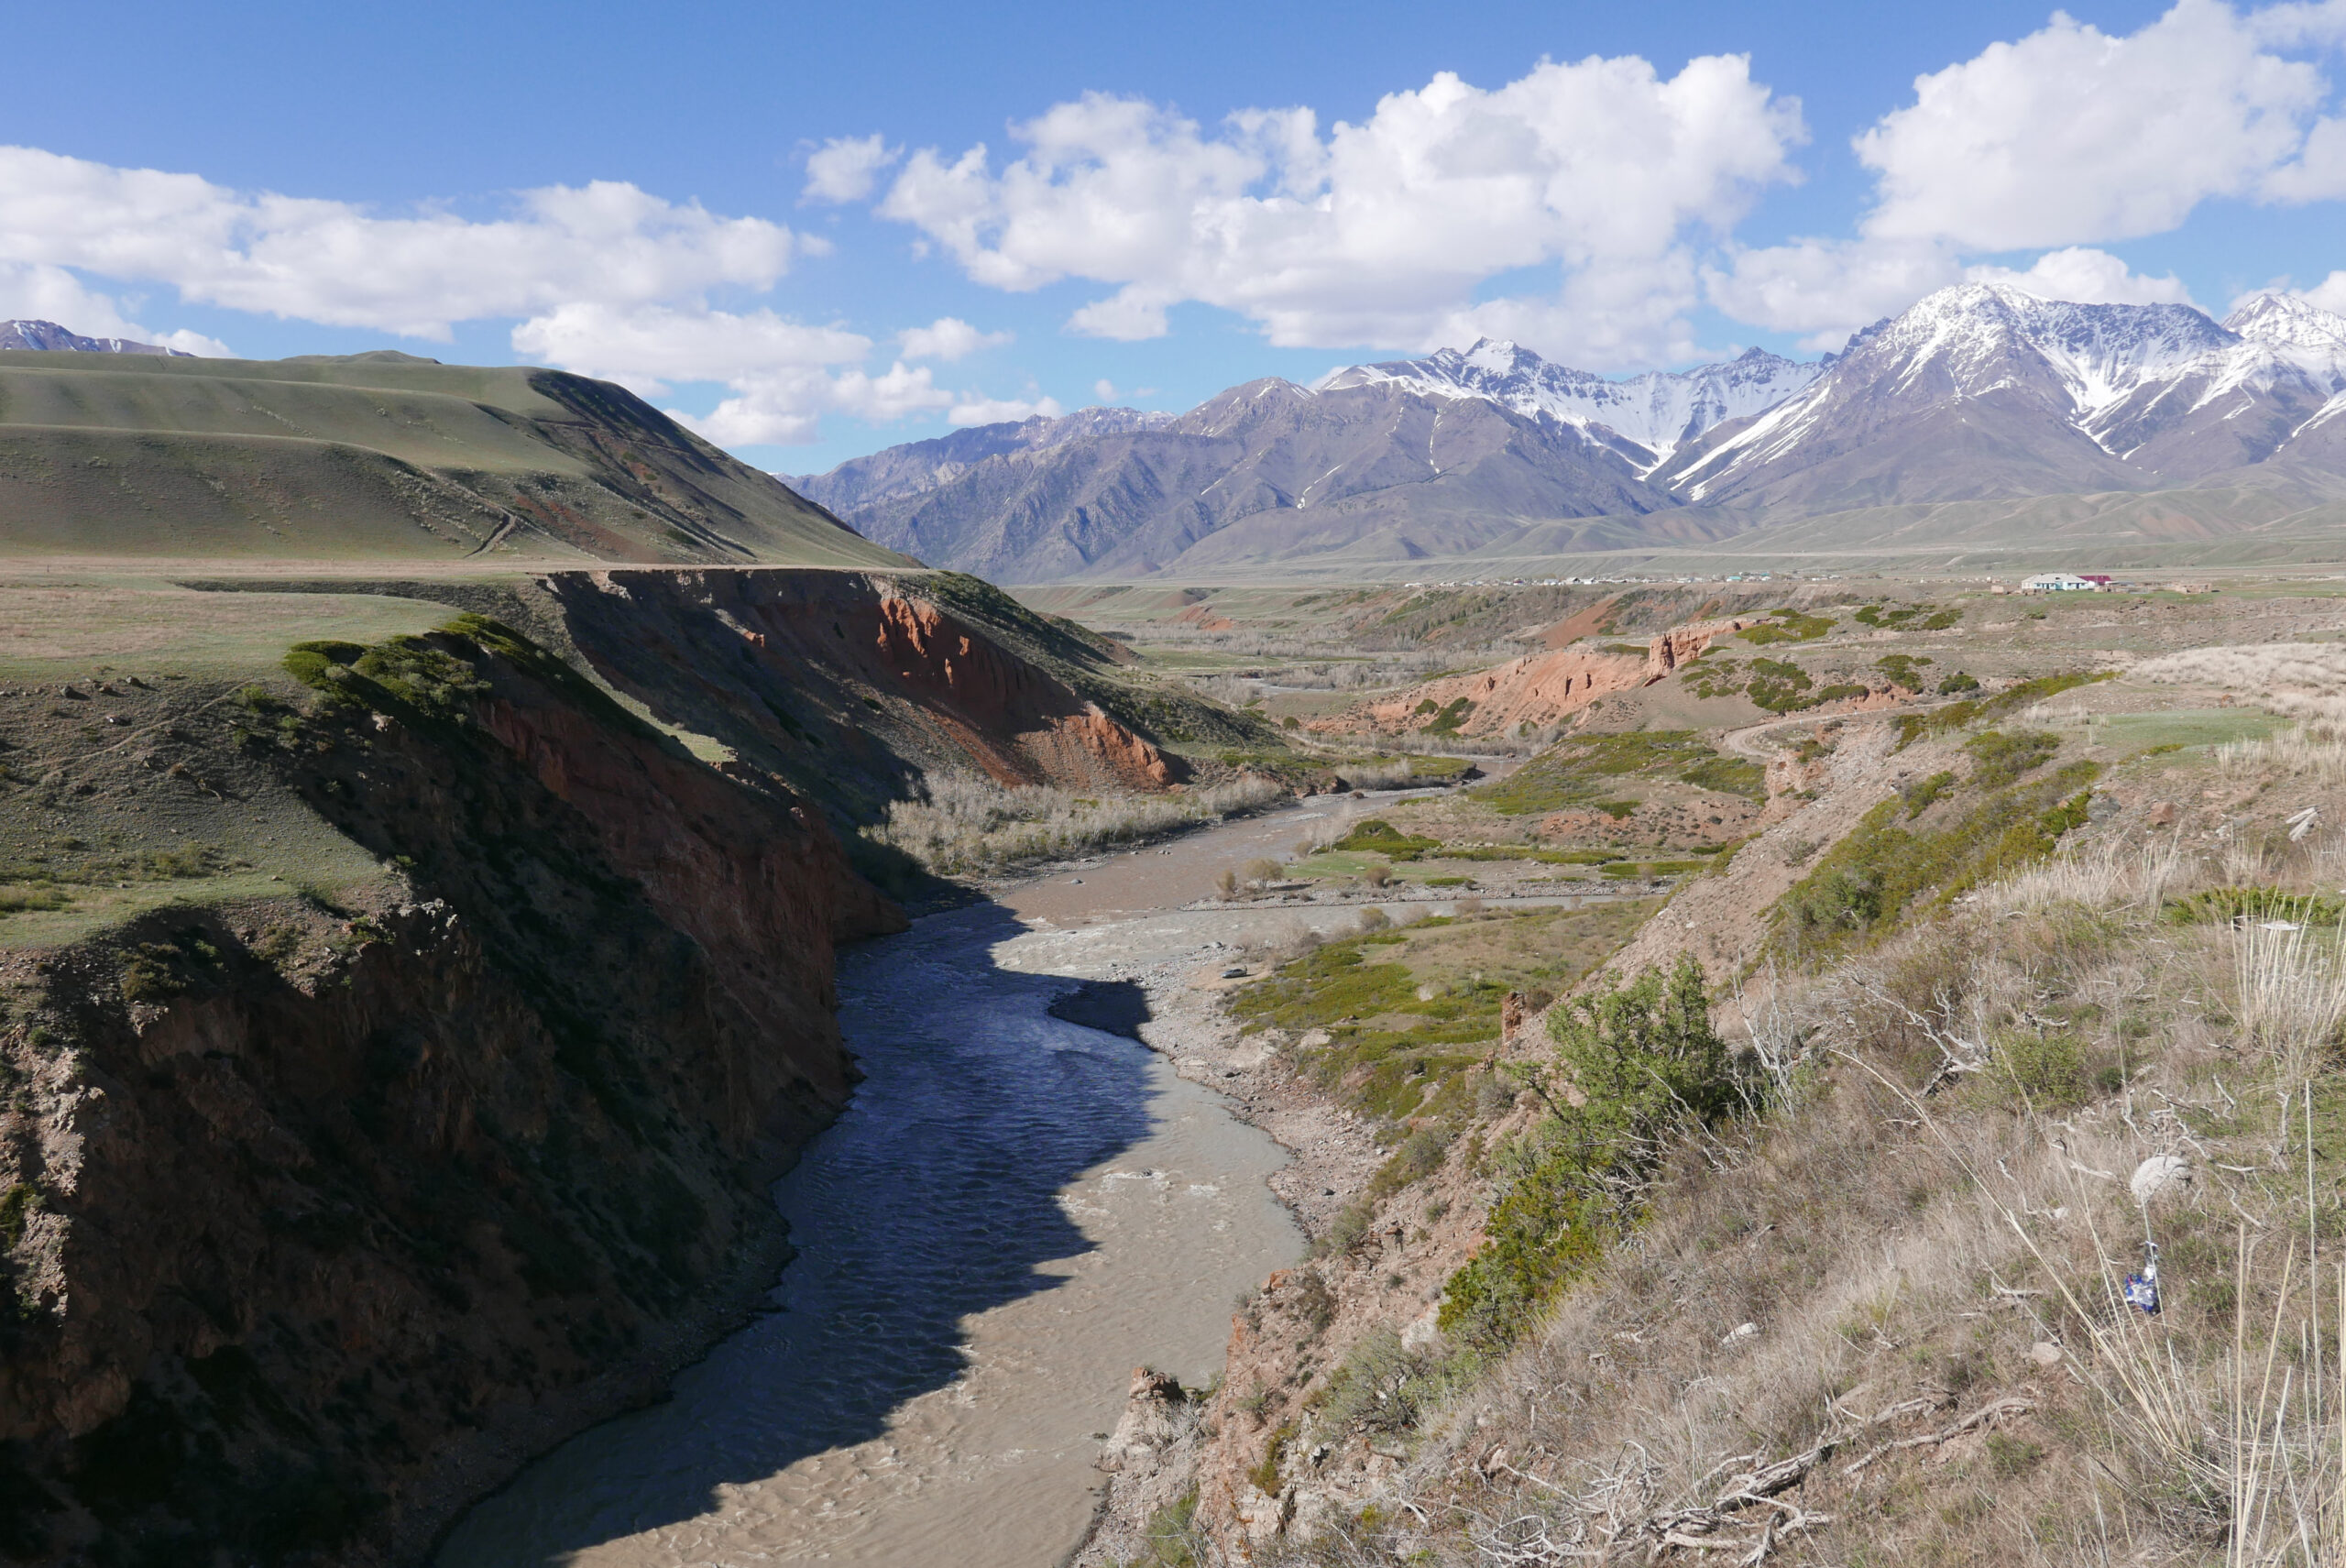 River Naryn, a brown river running through rocky mountains with dusty green trees/shrubs across the landscape